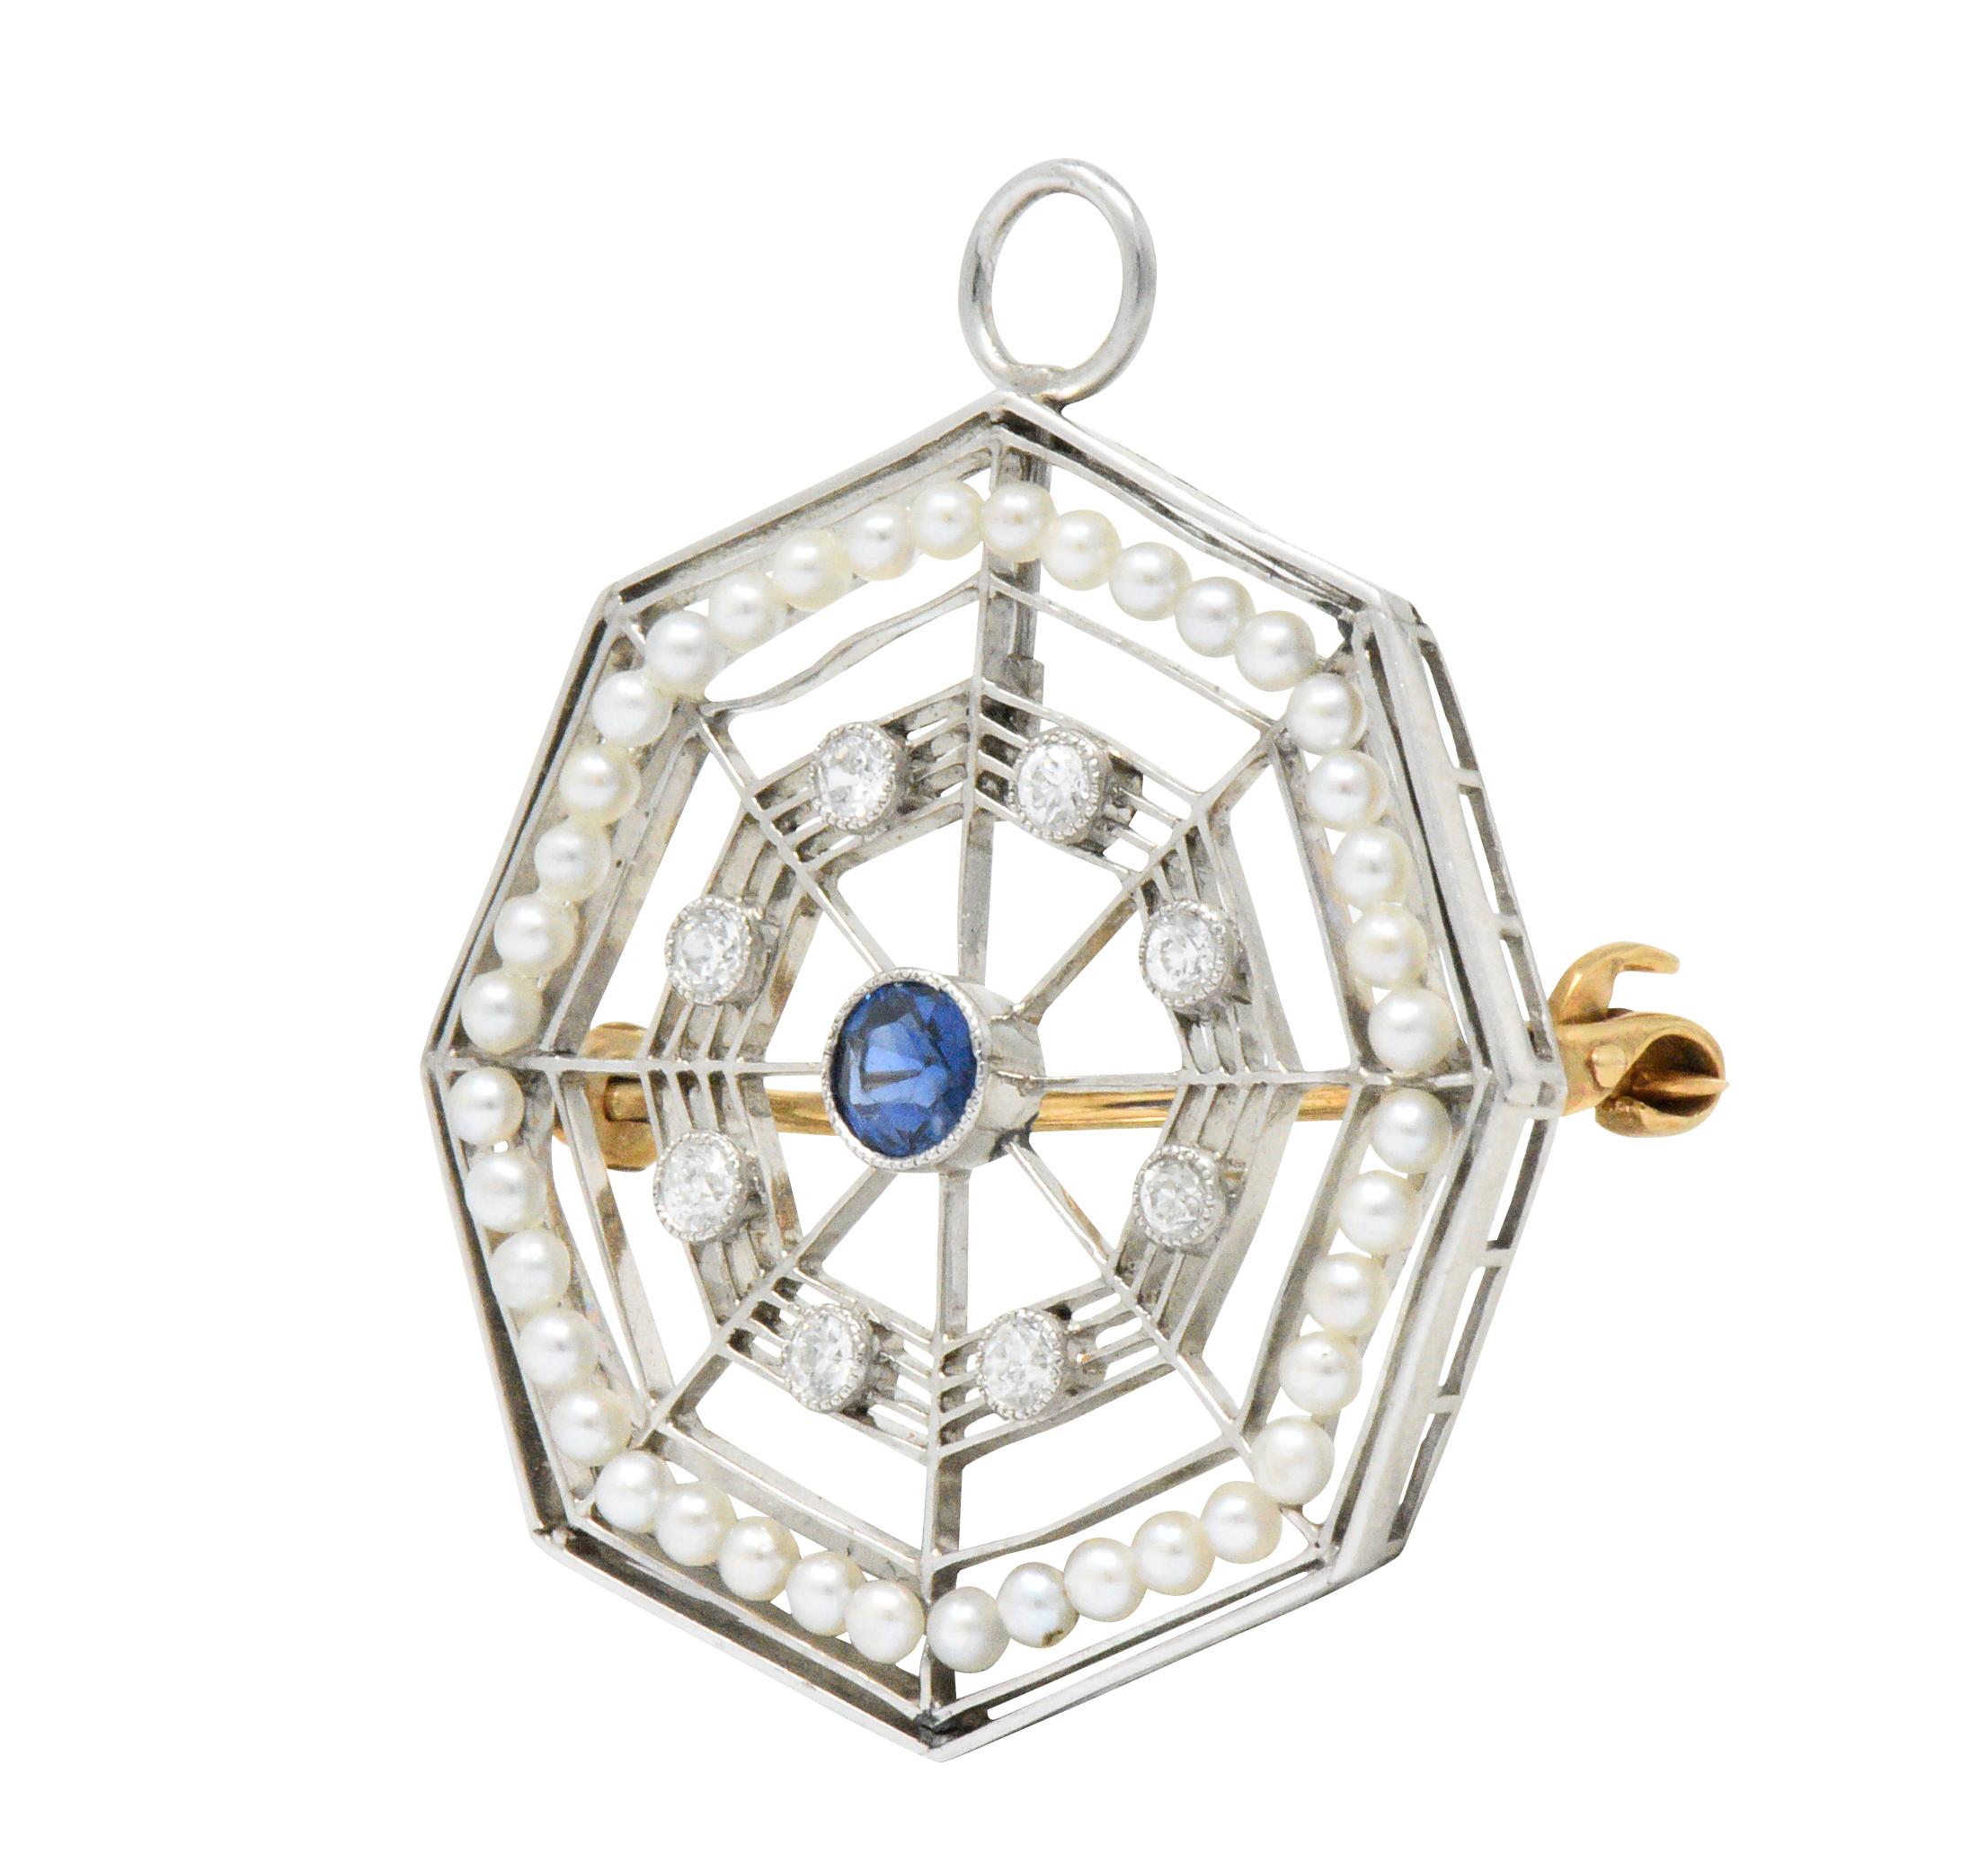 Spider web motif centering a round cut sapphire weighing approximately 0.15 carat, bright blue

Accented with 8 old European cut diamonds, weighing approximately 0.16 carat total, eye-clean and white

Intricate webbing and seed pearl detail

Late